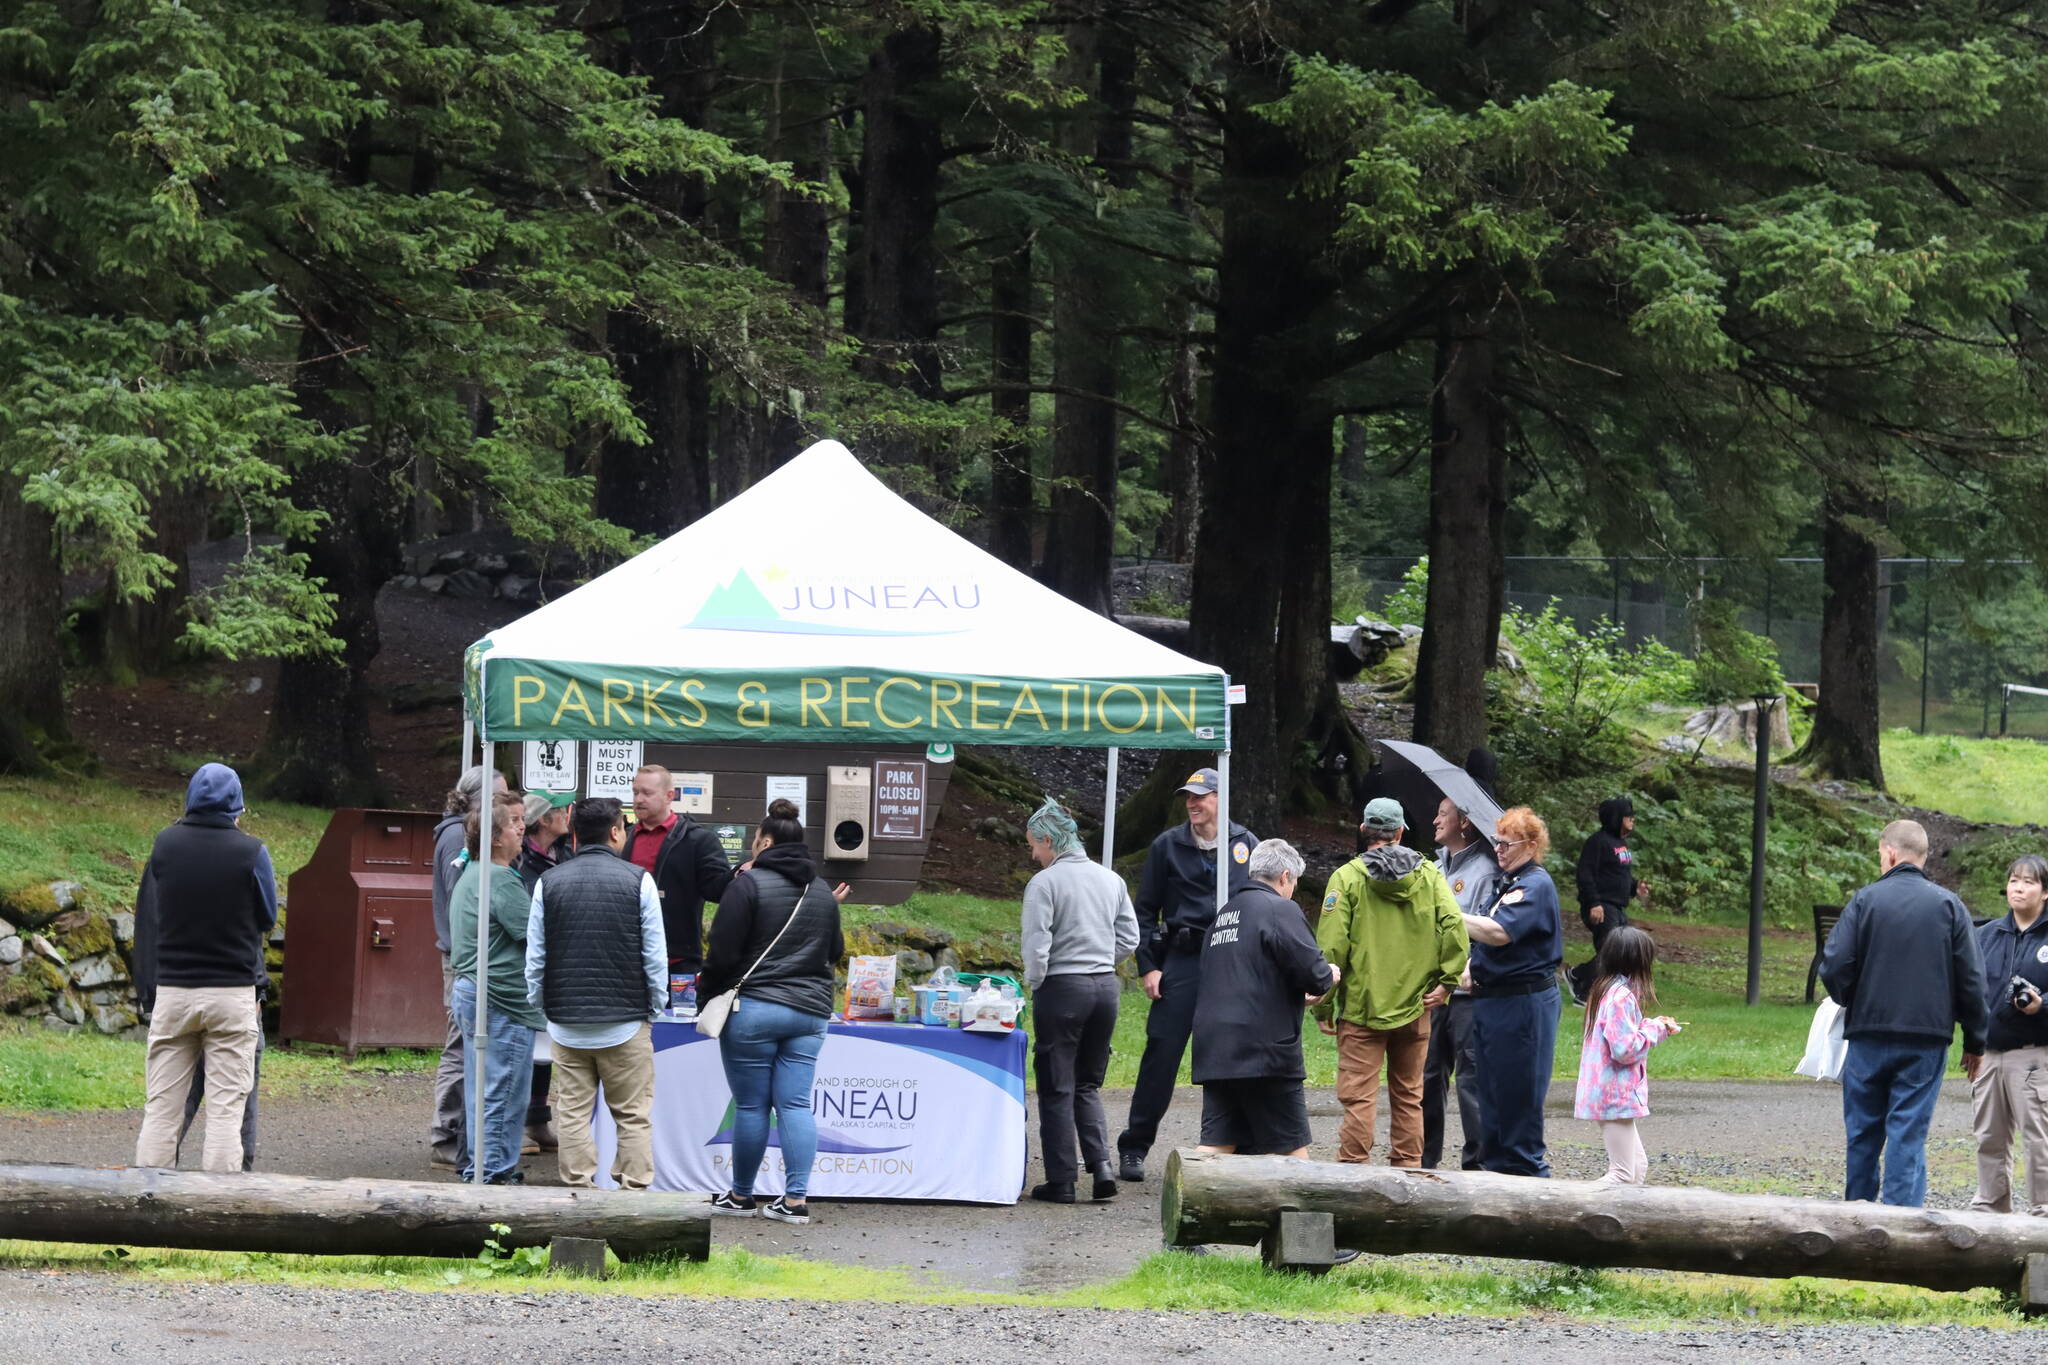 Juneau’s Parks and Recreation Department hosts a National Night Out event at Cope Park on Tuesday, one of three local public events connected to the national campaign that seeks to strengthen ties between police and communities. (Meredith Jordan / Juneau Empire)